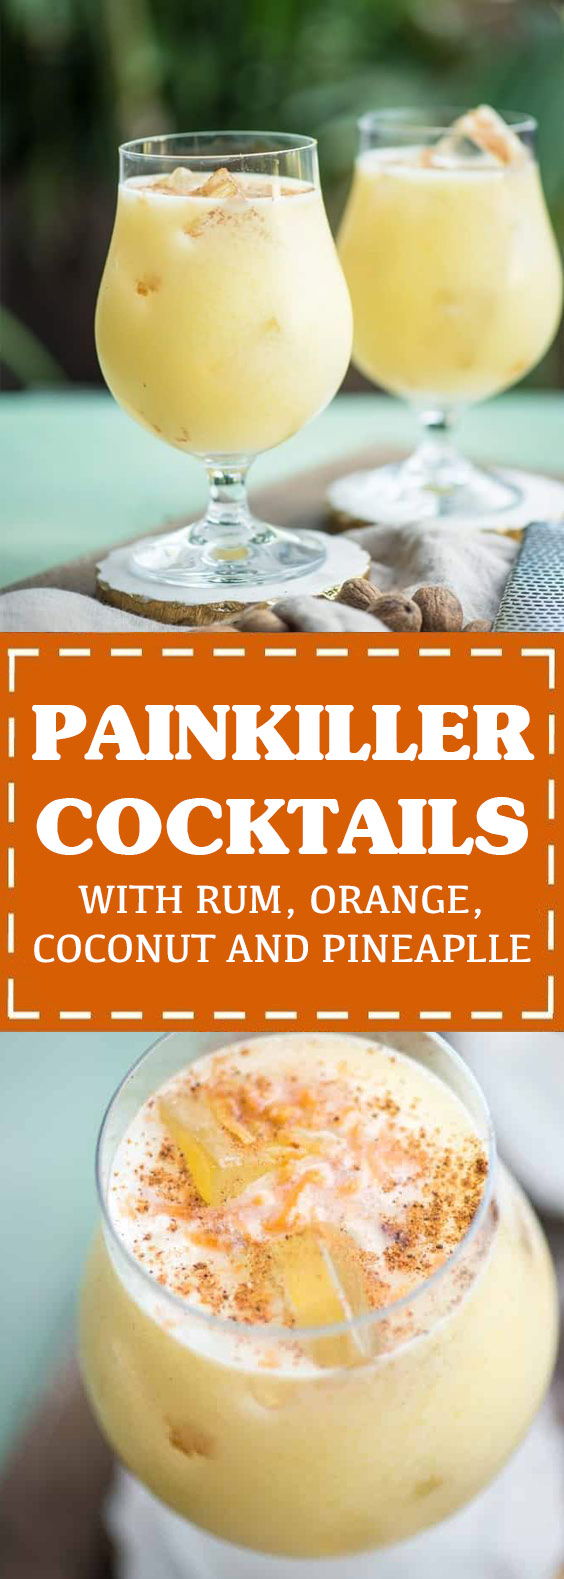 The Painkiller Drink